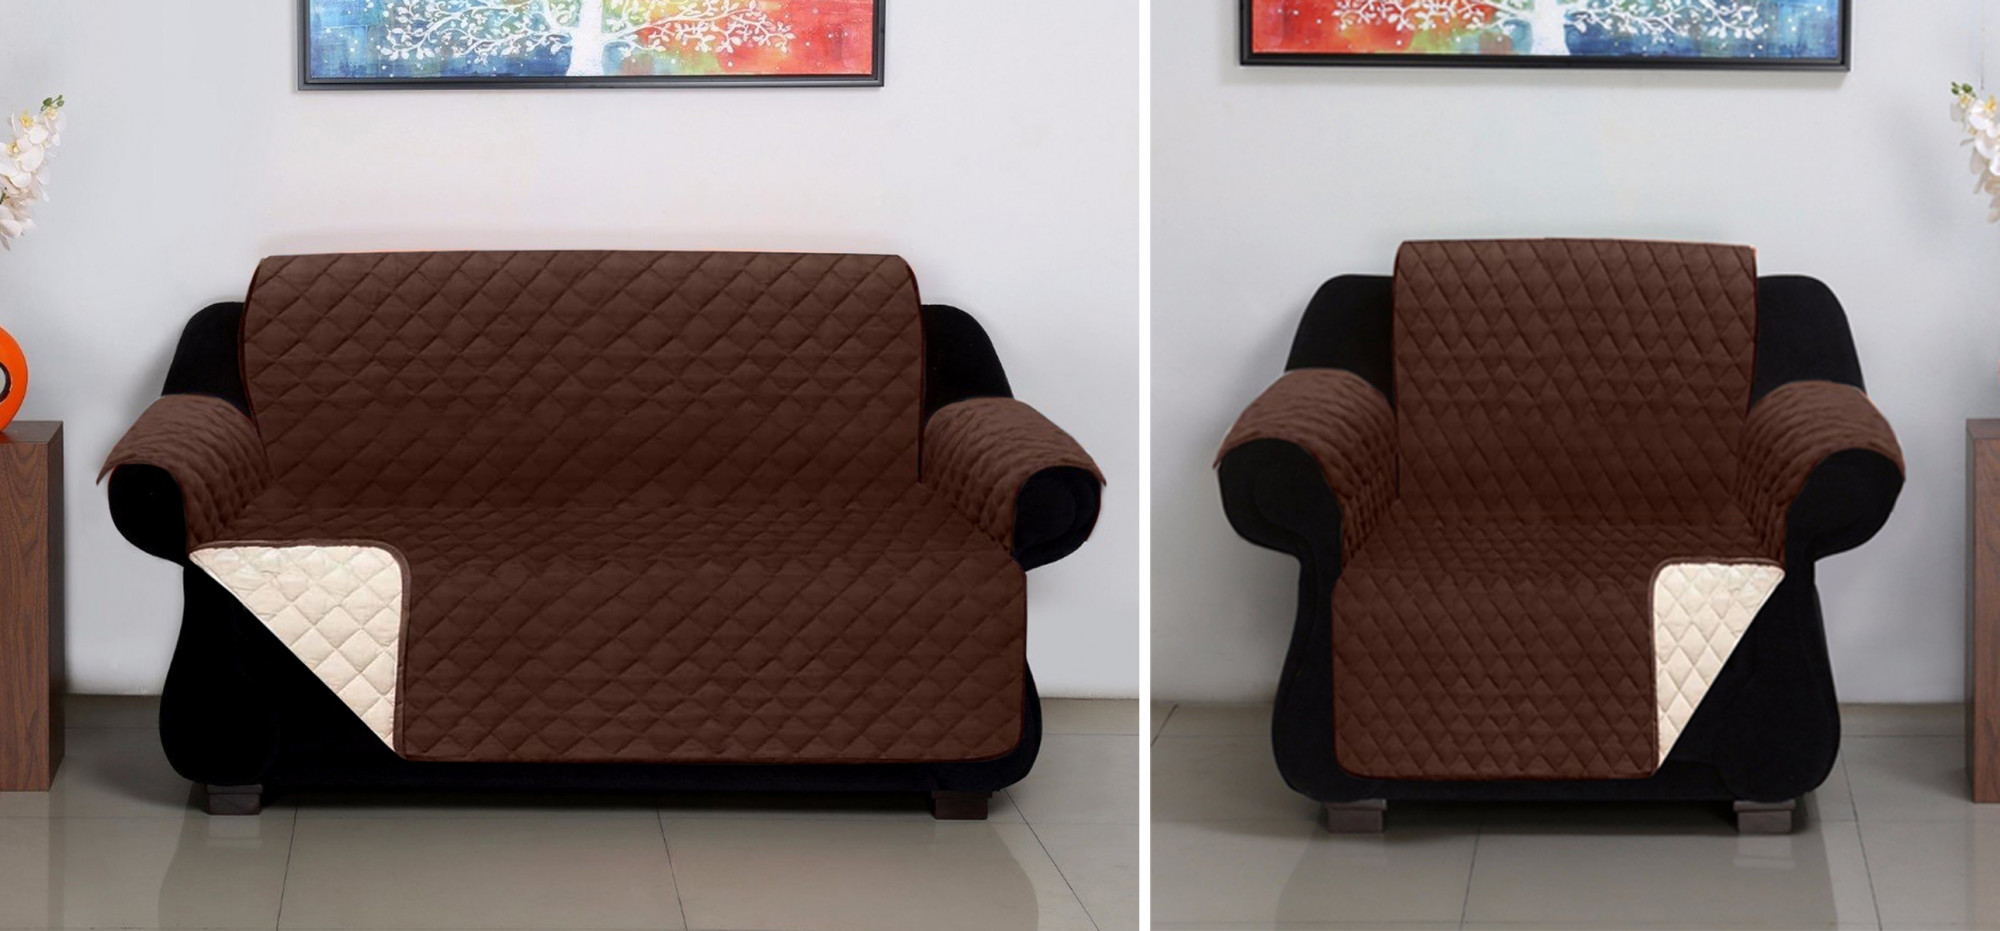 Kuber Industries Reversible 2+1 Seater Polyester Sofa Cover for Living Room, Brown & Ivory